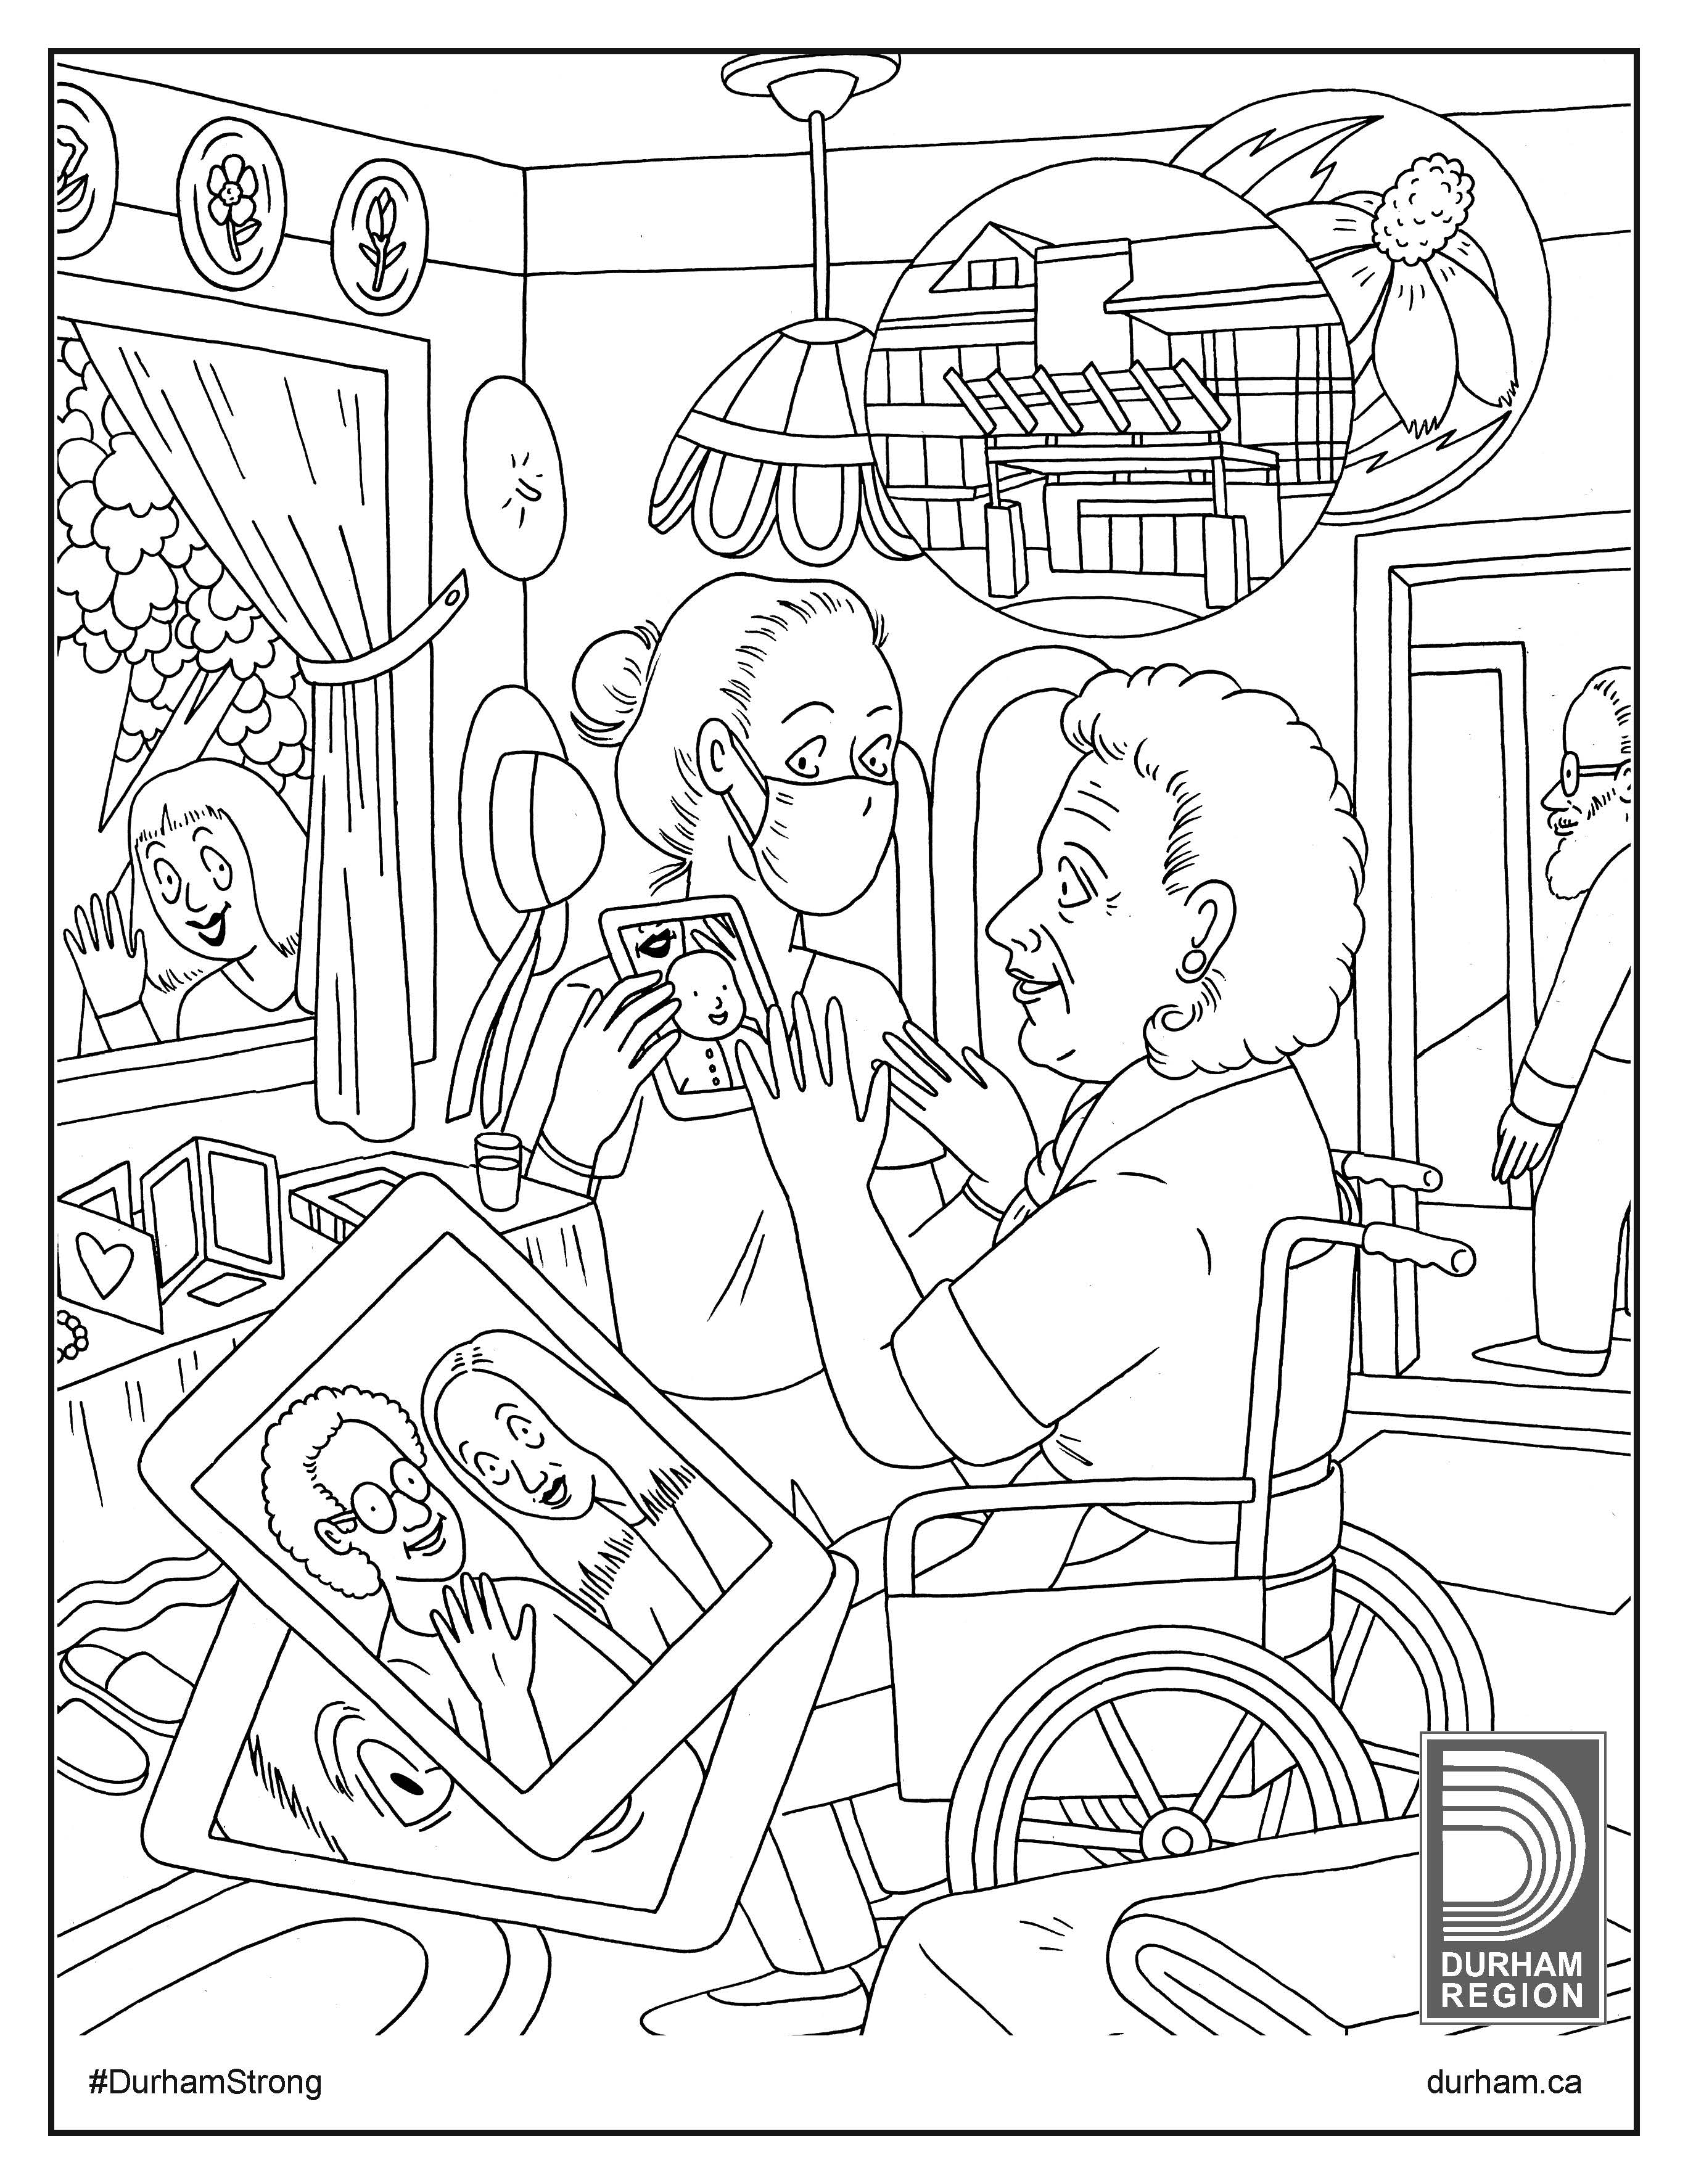 Illustration of a caregiver and resident at a long-term care home